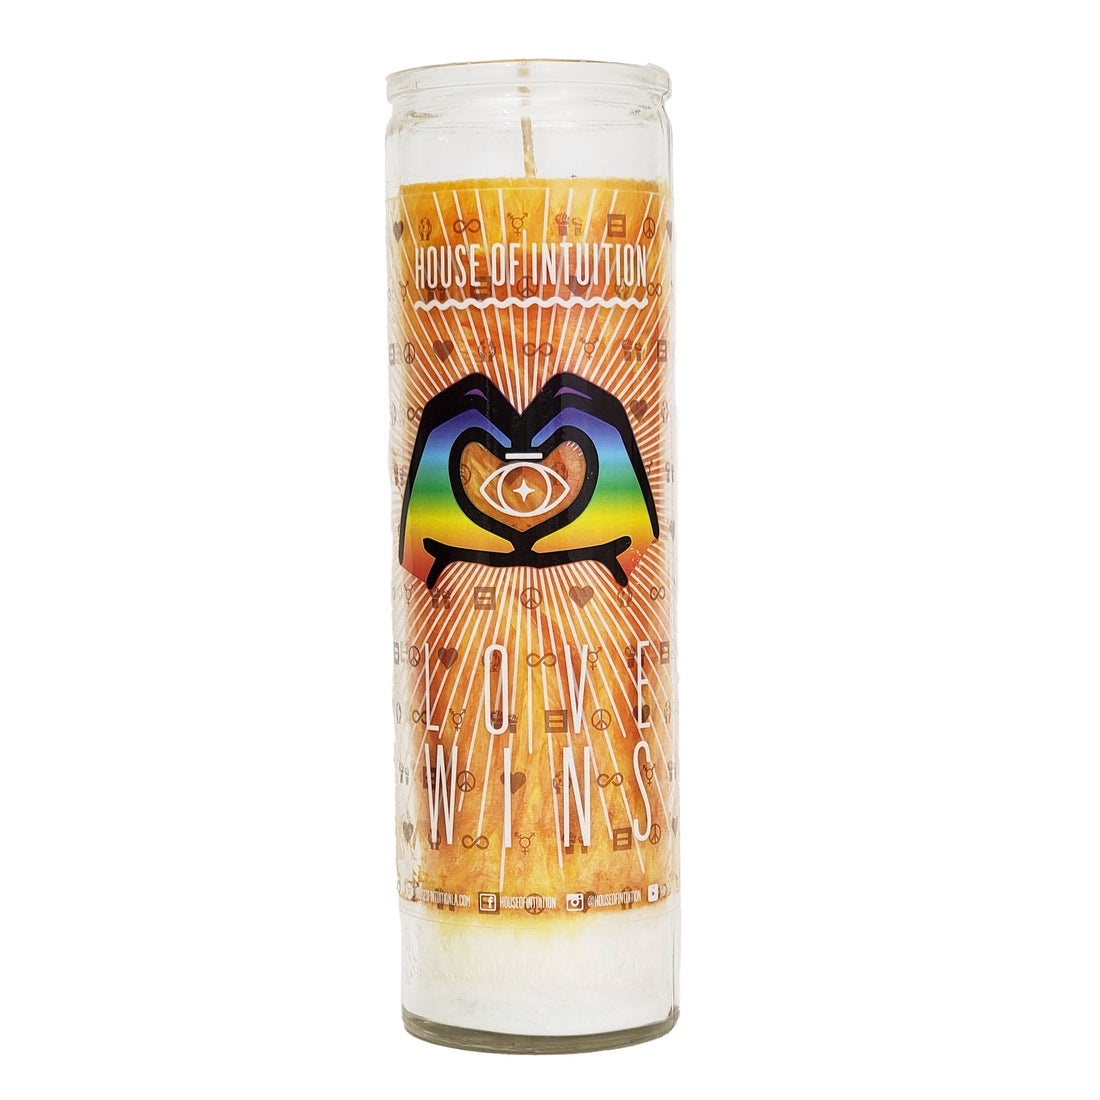 Love Wins Candle (Limited Edition) Limited Edition Candles House of Intuition 